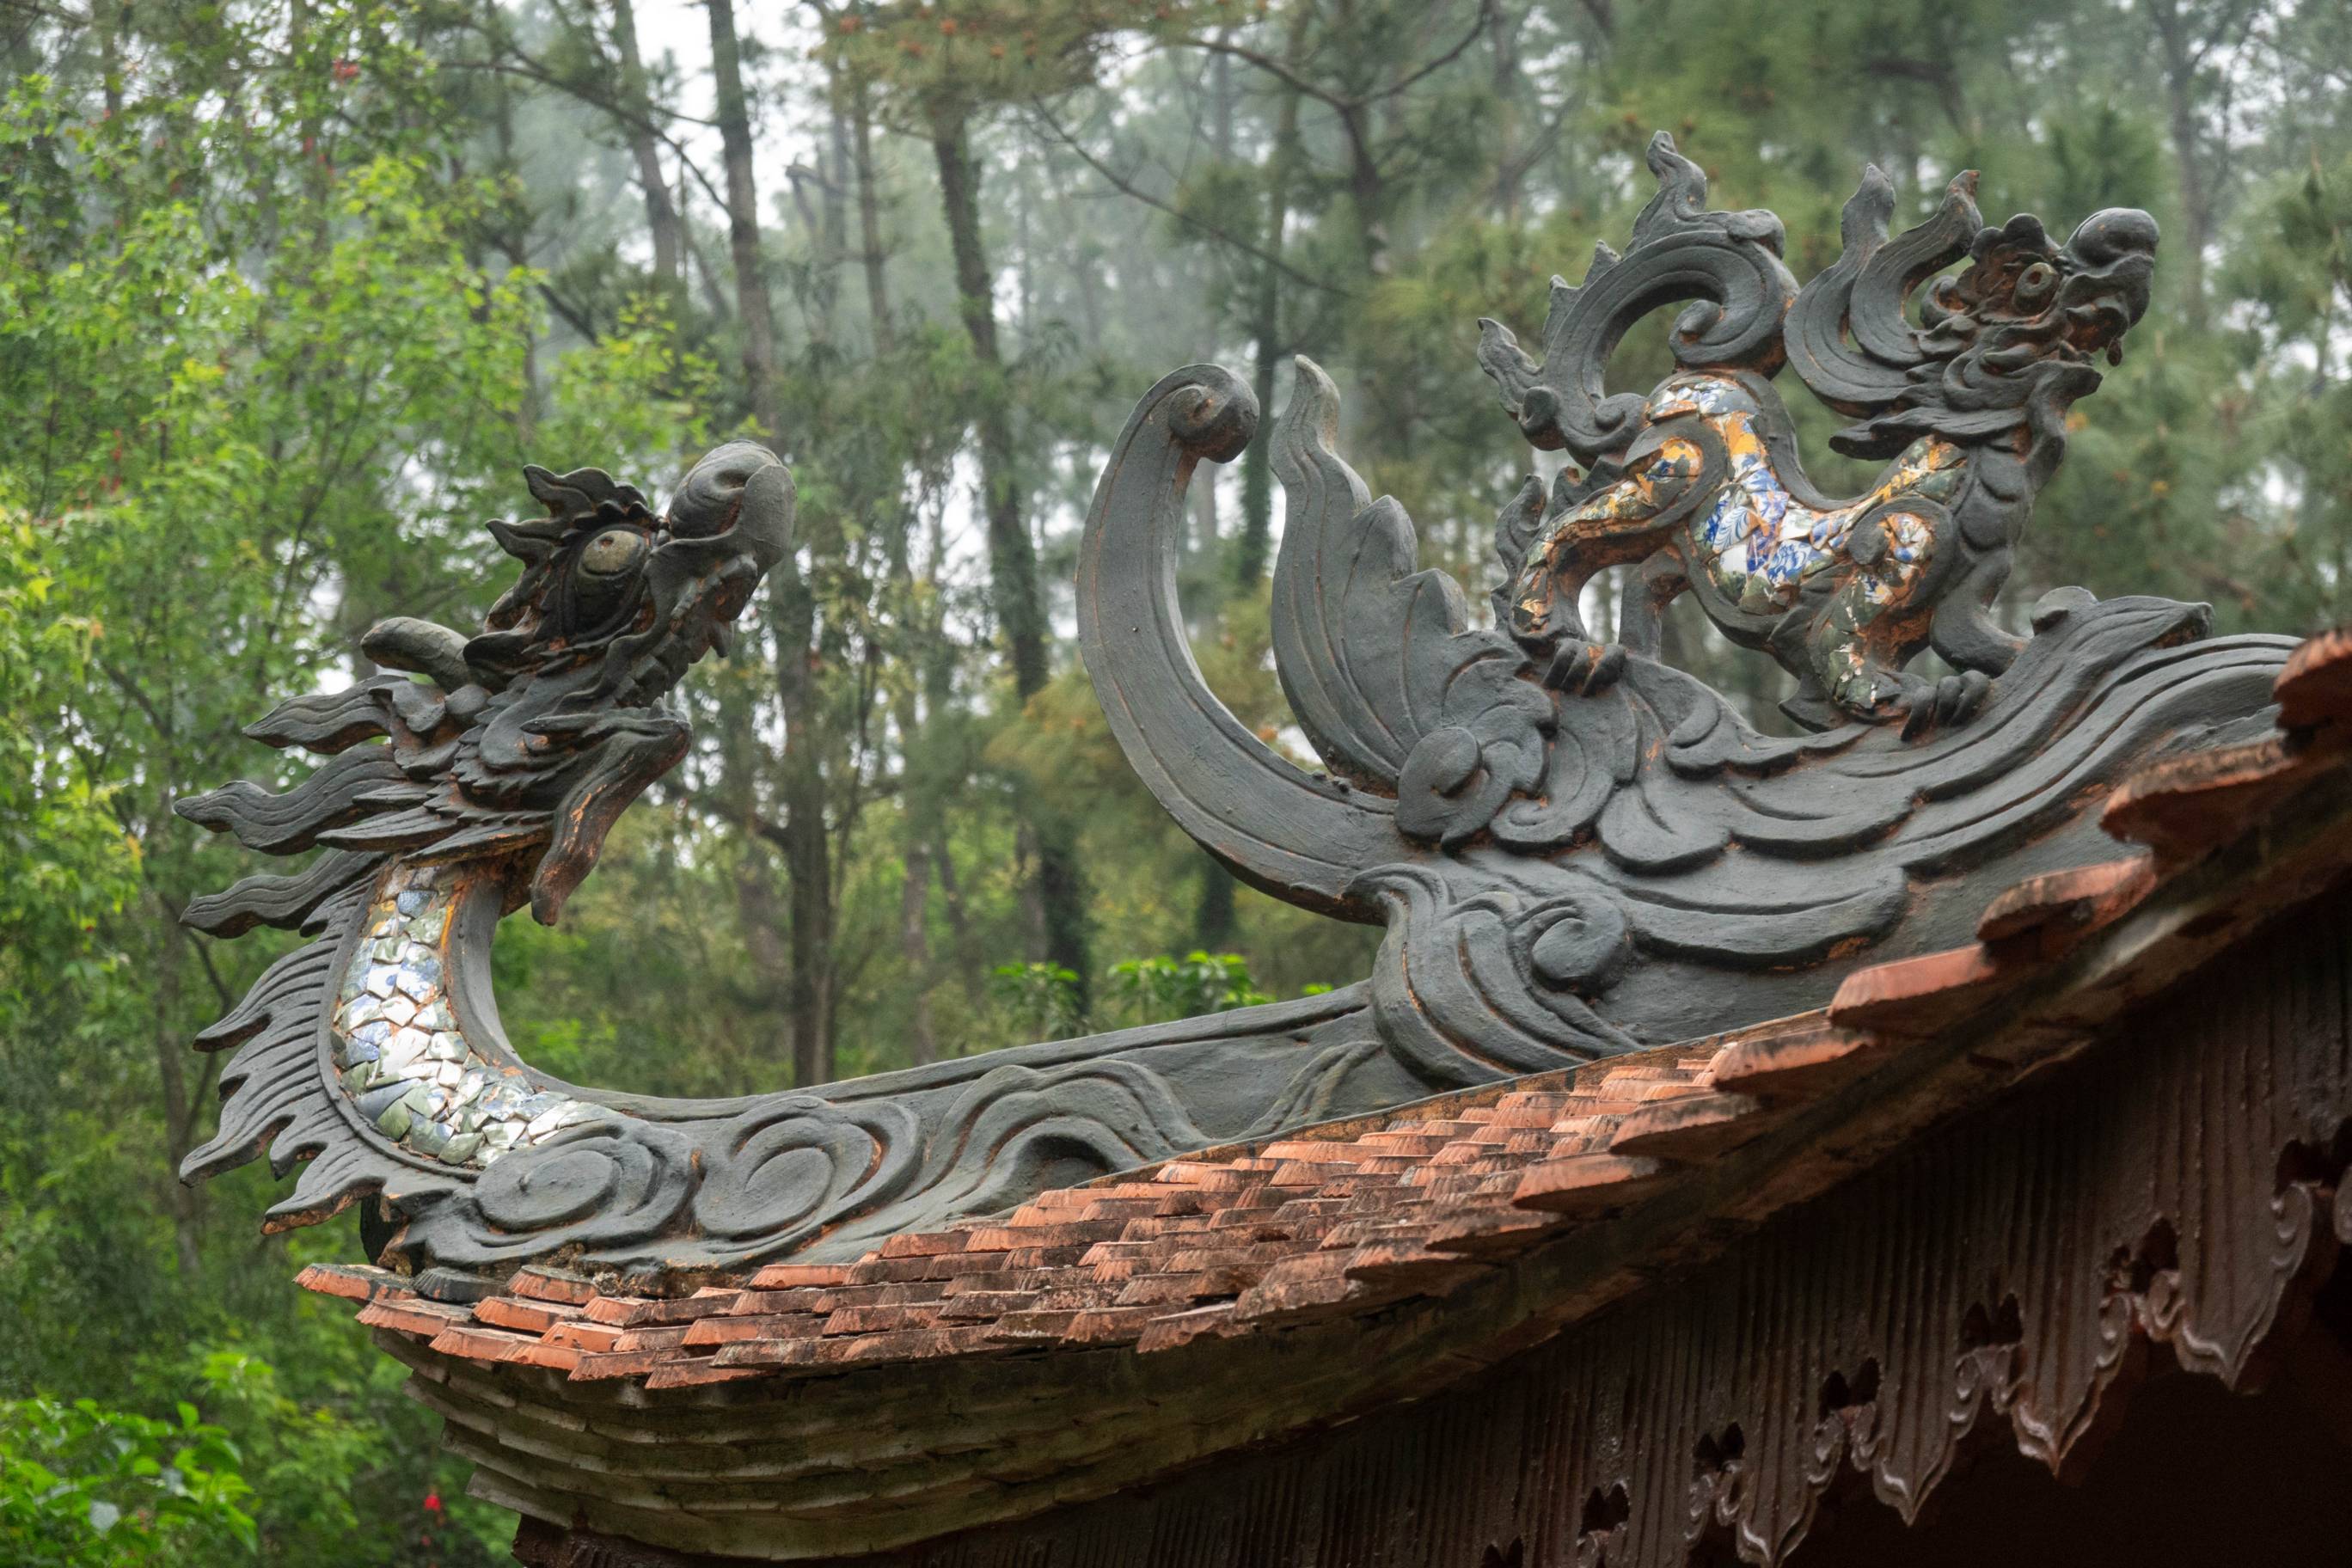 picture of dragon stature (on left) on a rooftop and there is a lion statue on the right